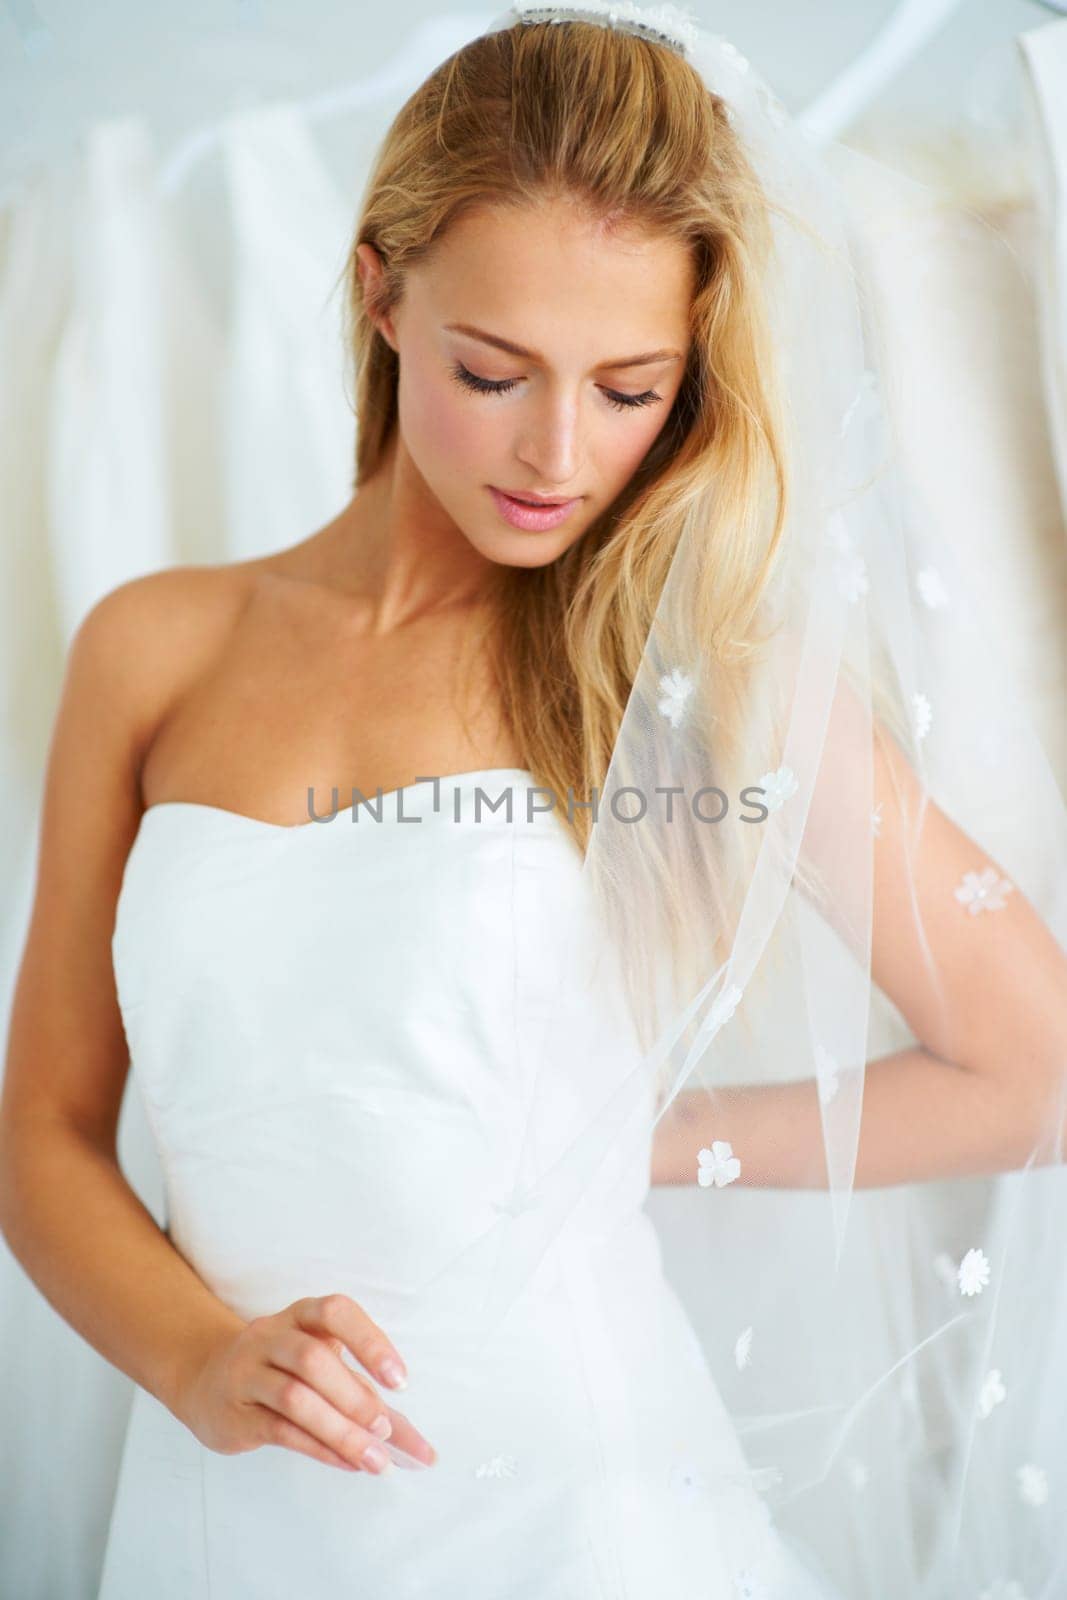 Wedding, beauty and young bride in a dress in a luxury boutique, shop or store in a mall. Retail, romance and female person from Canada preparing for marriage ceremony, party or reception for love.